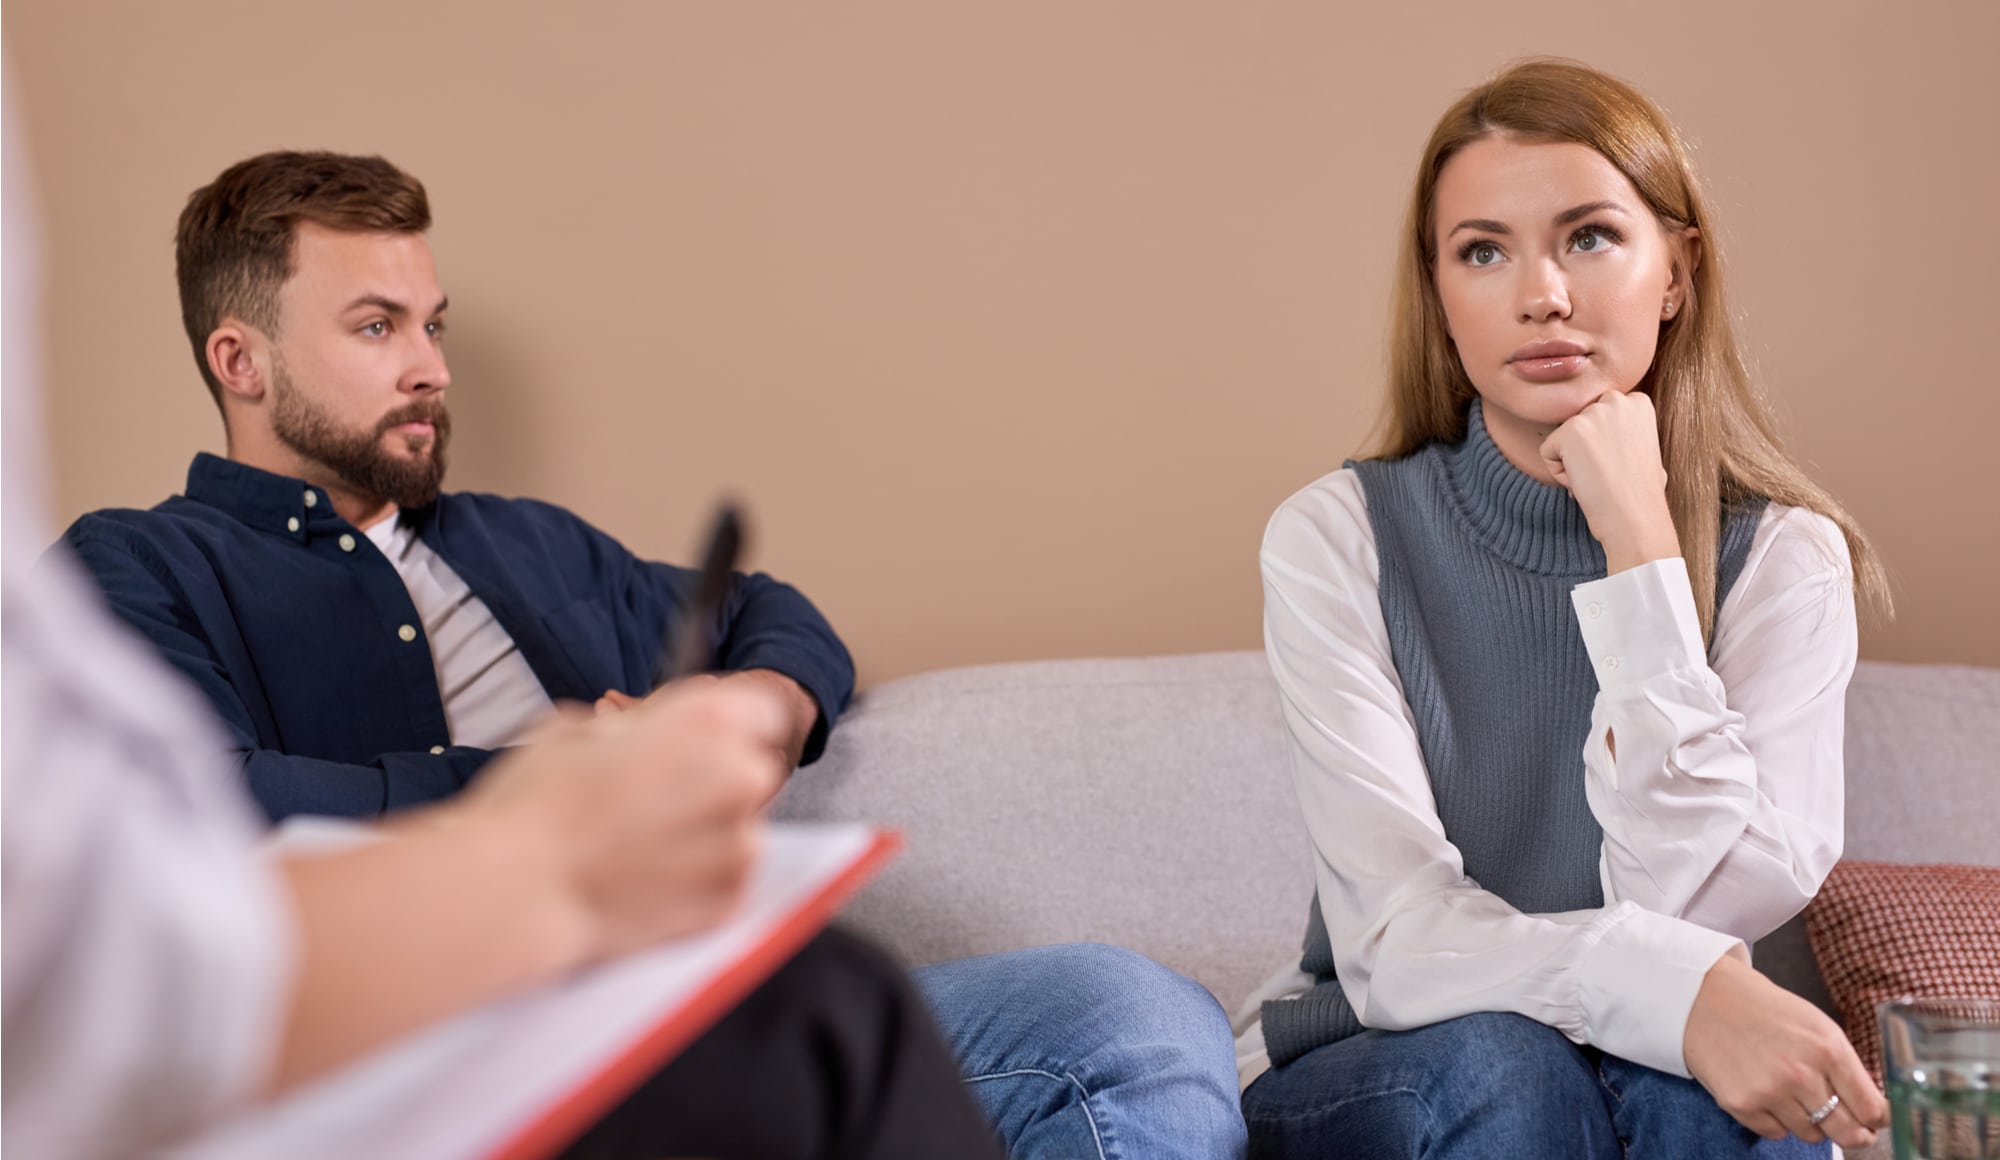 Dating While Not Sober Pathfinders Recovery Center - A couple is meeting with an addiction counselor to determine how to get back on the road to recovery after relapsing and now dating while not sober.